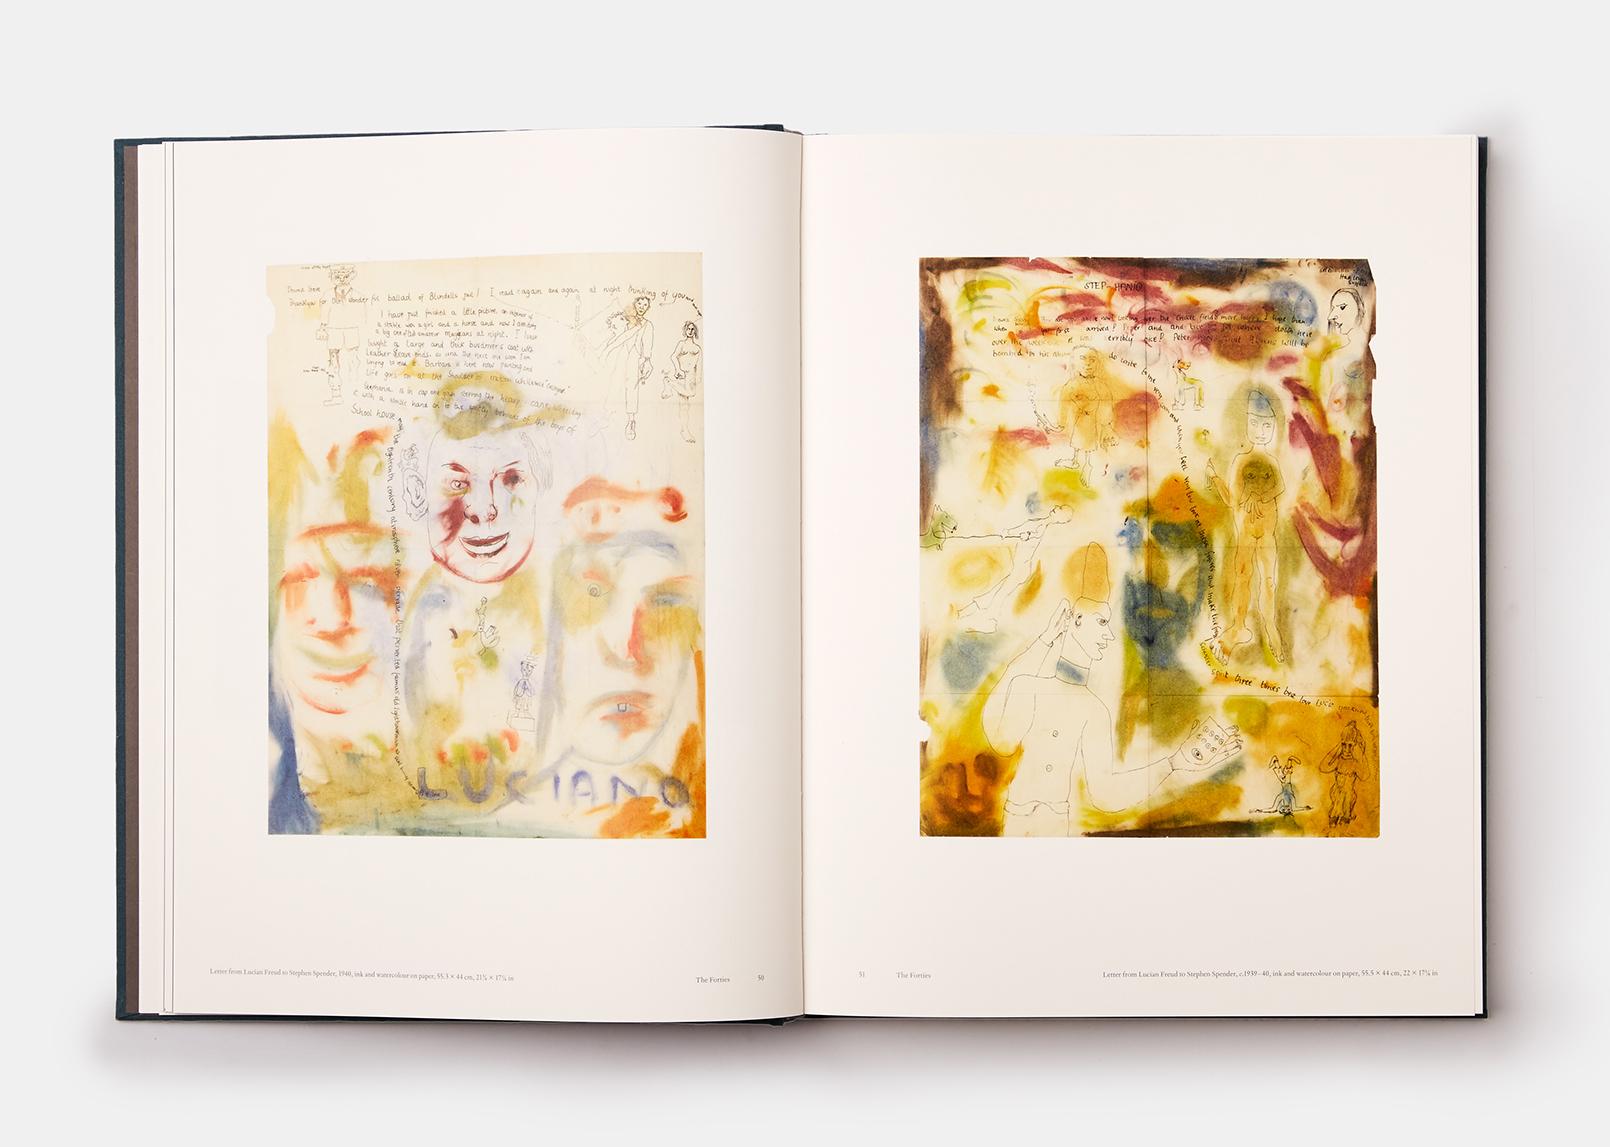 Paper Lucian Freud Two-Volume Monograph with Slipcase